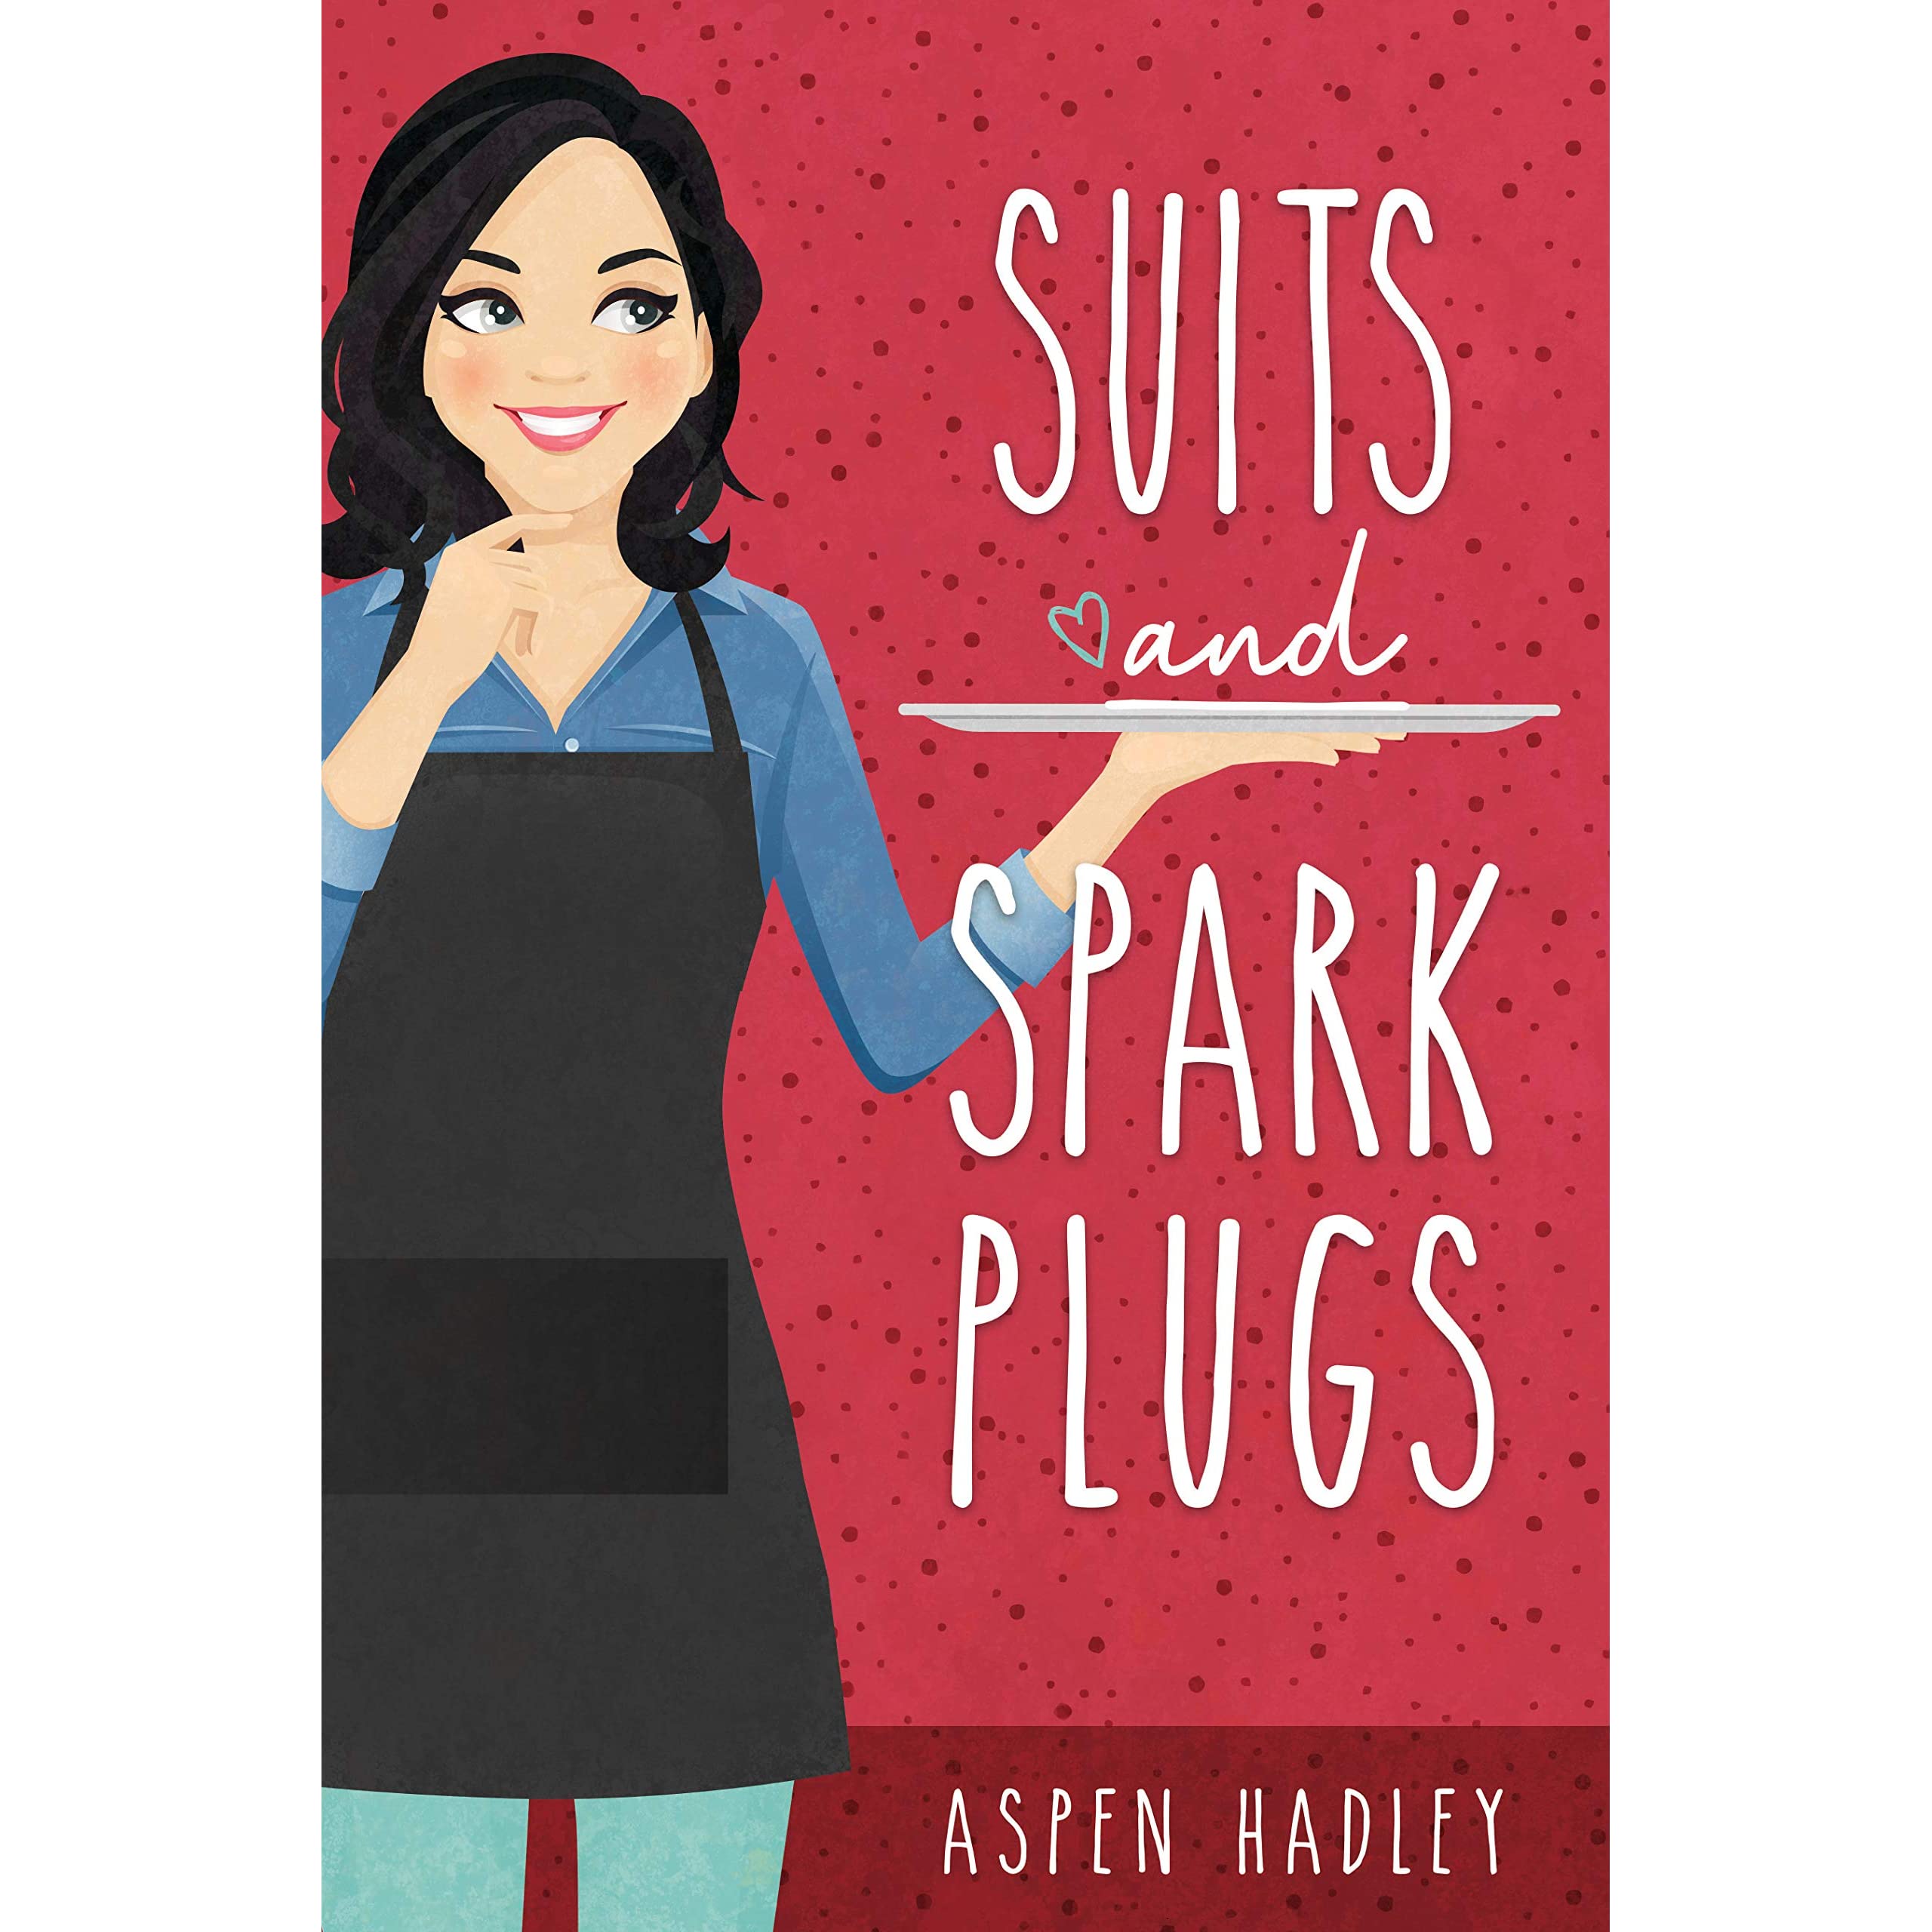 Suits and spark plugs by Aspen Hadley